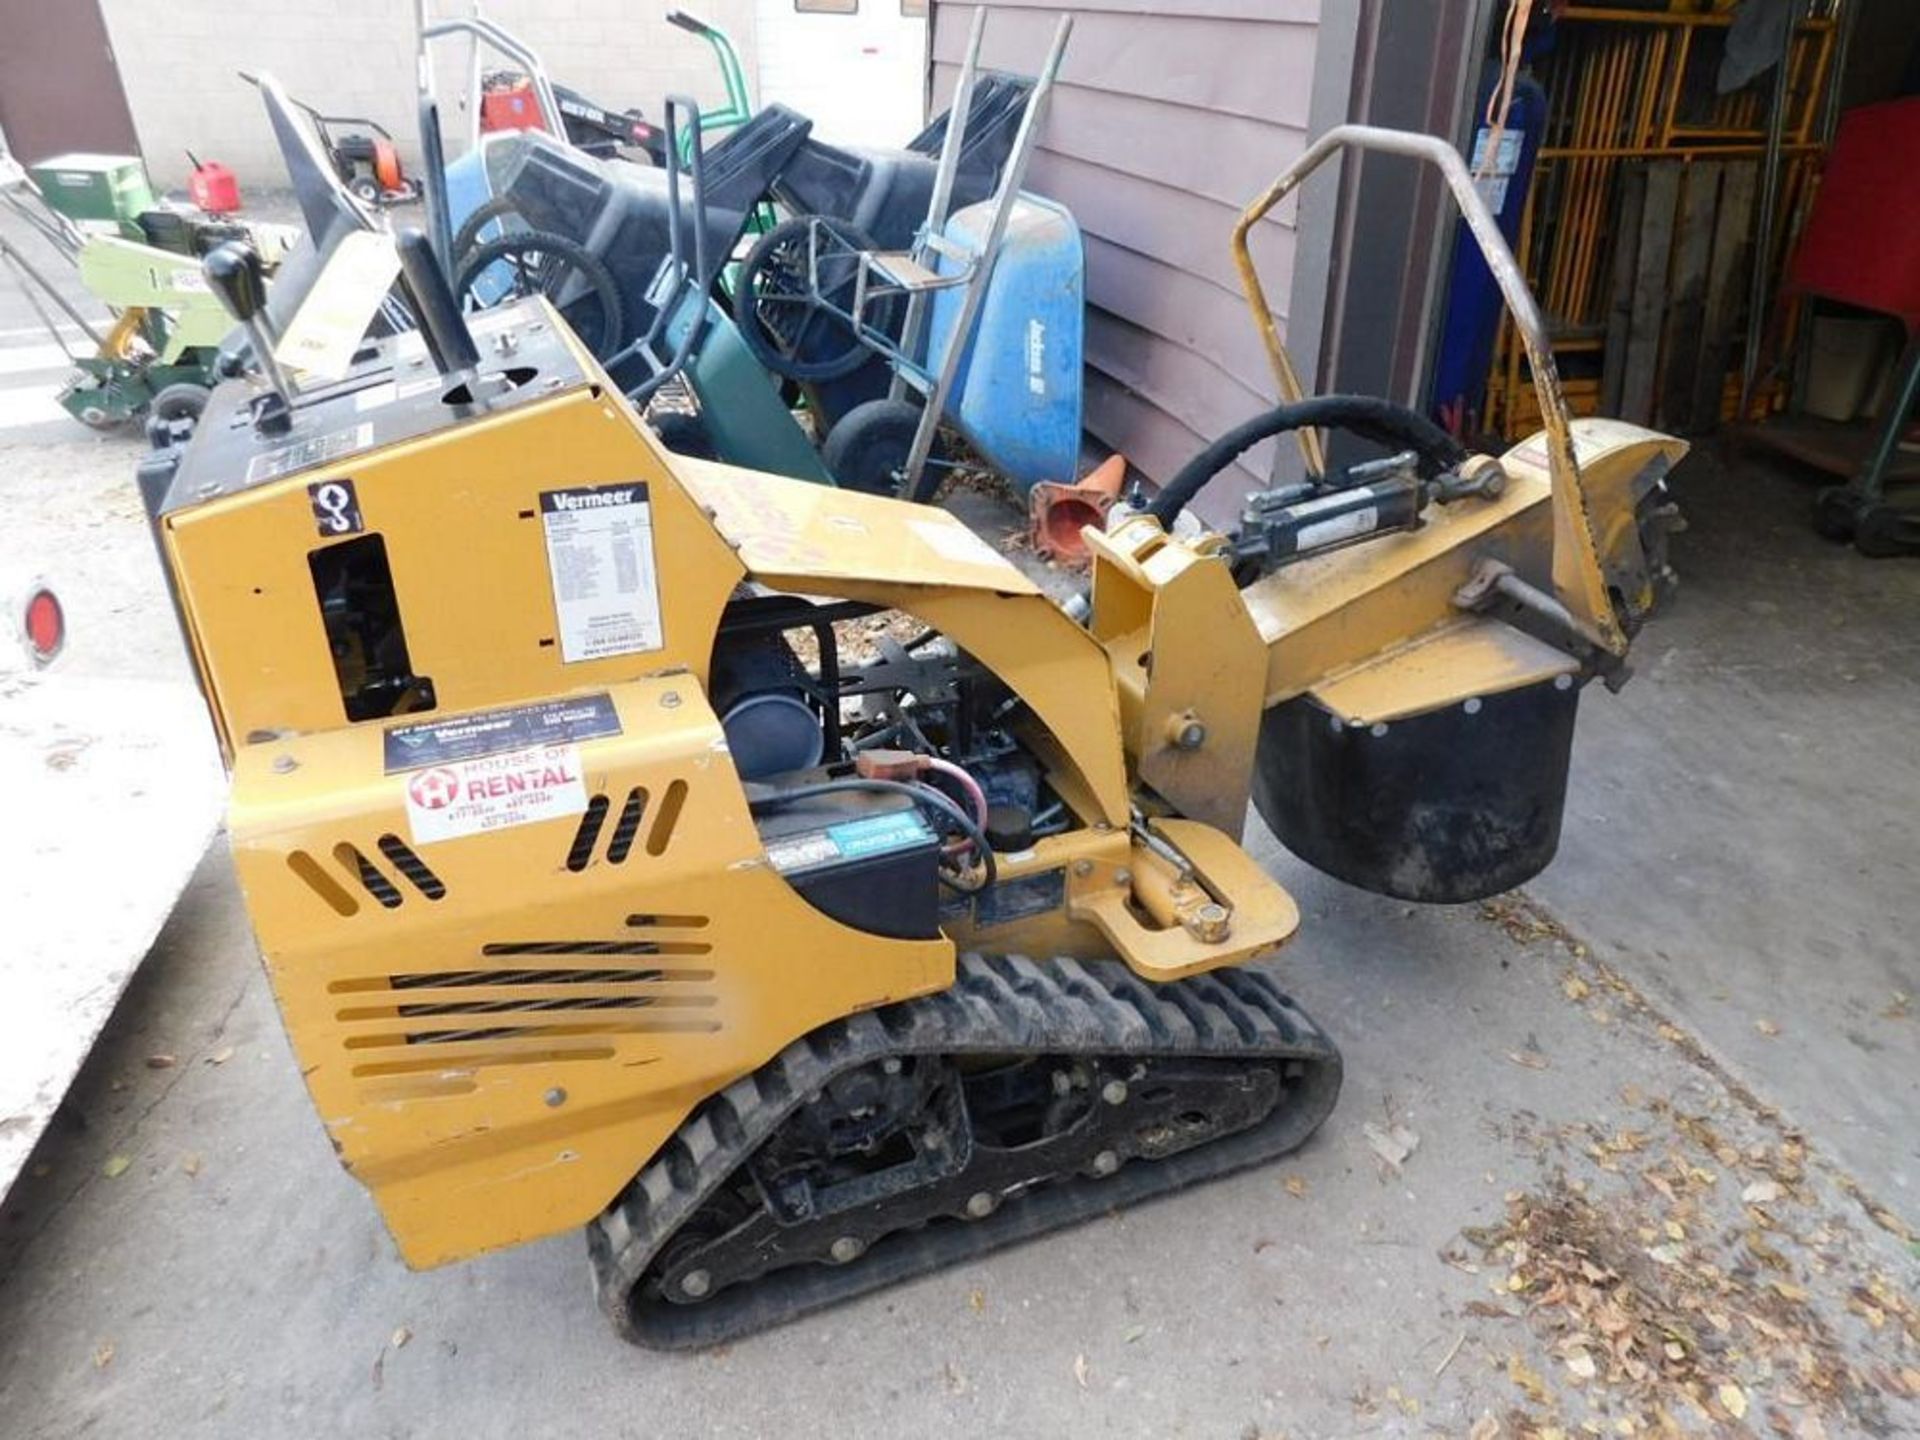 2016 Vermeer SC30 TX Gas Stump Cutter, VIN 1VRC070N1F1001131, 803 Indicated Hours (#1) (LOCATION: